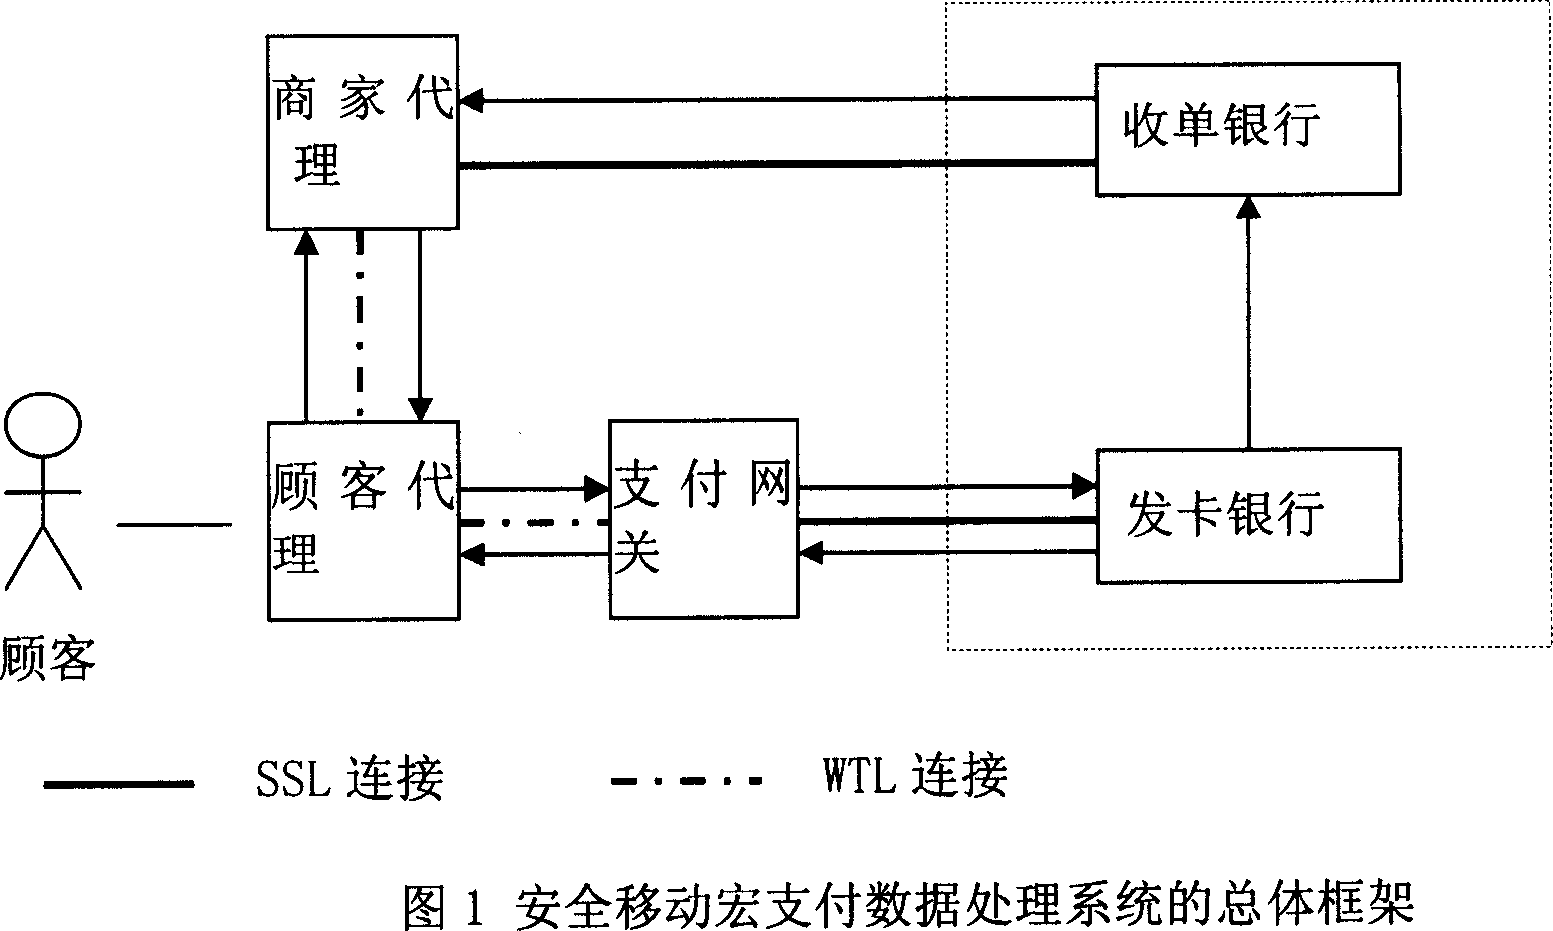 Safe mobile macro-payment data processing system